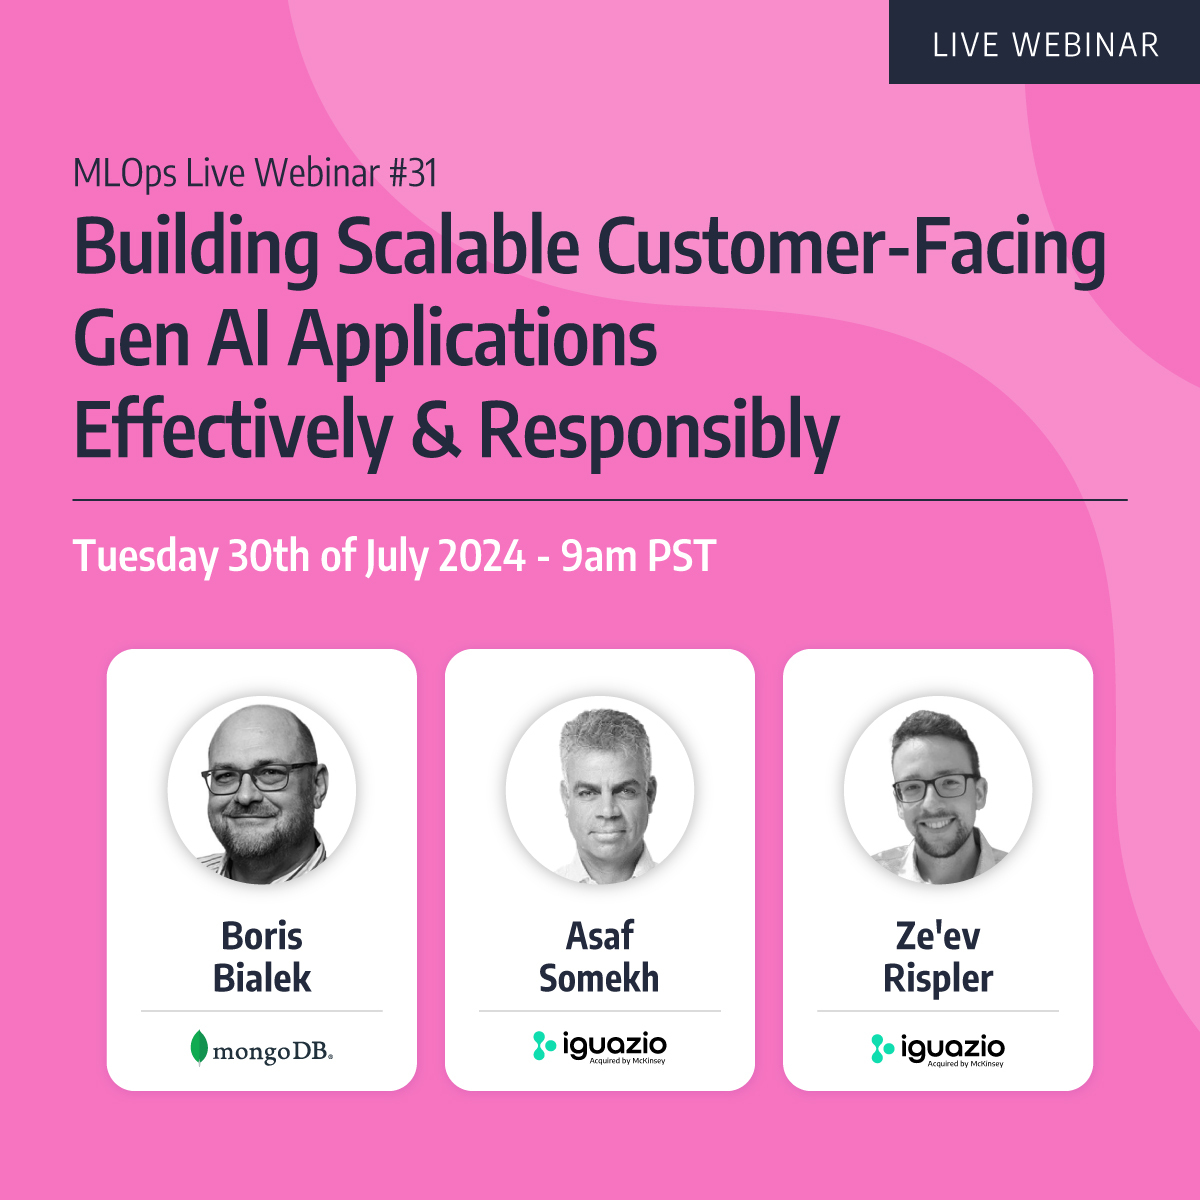 MLOps Live #31 - Building Scalable Customer-Facing Gen AI Applications Effectively & Responsibly